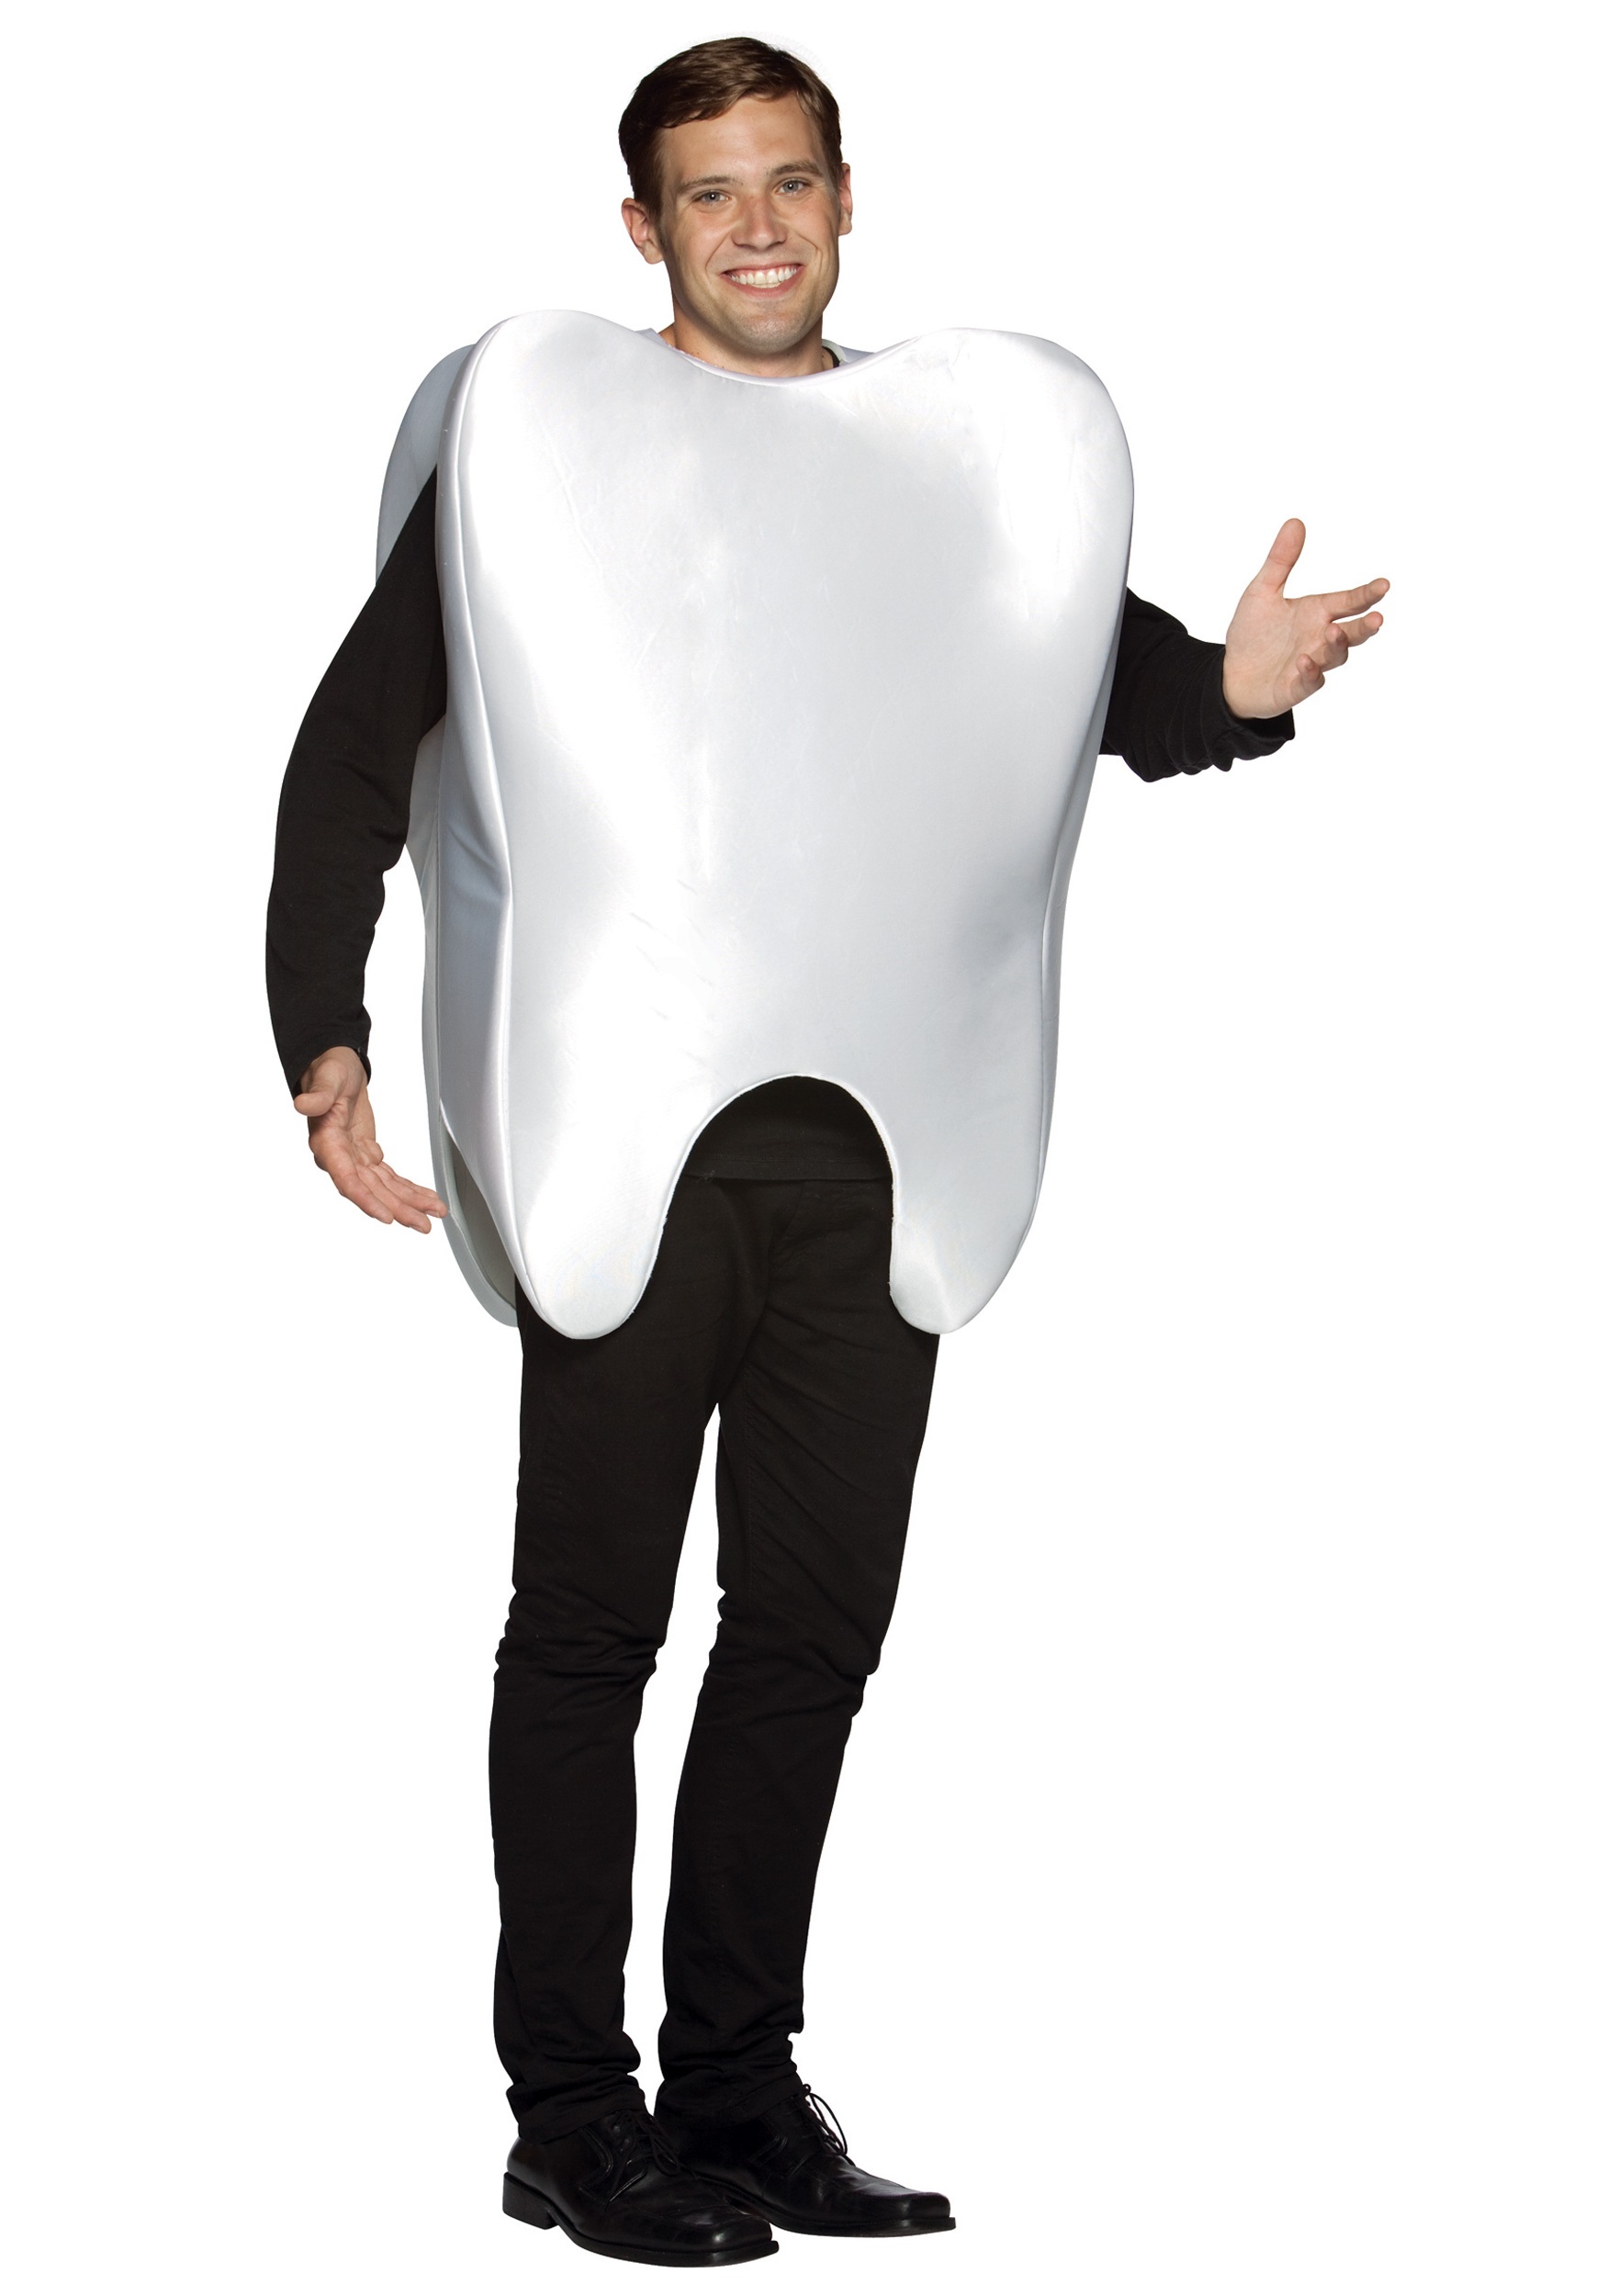 tooth costume for adults